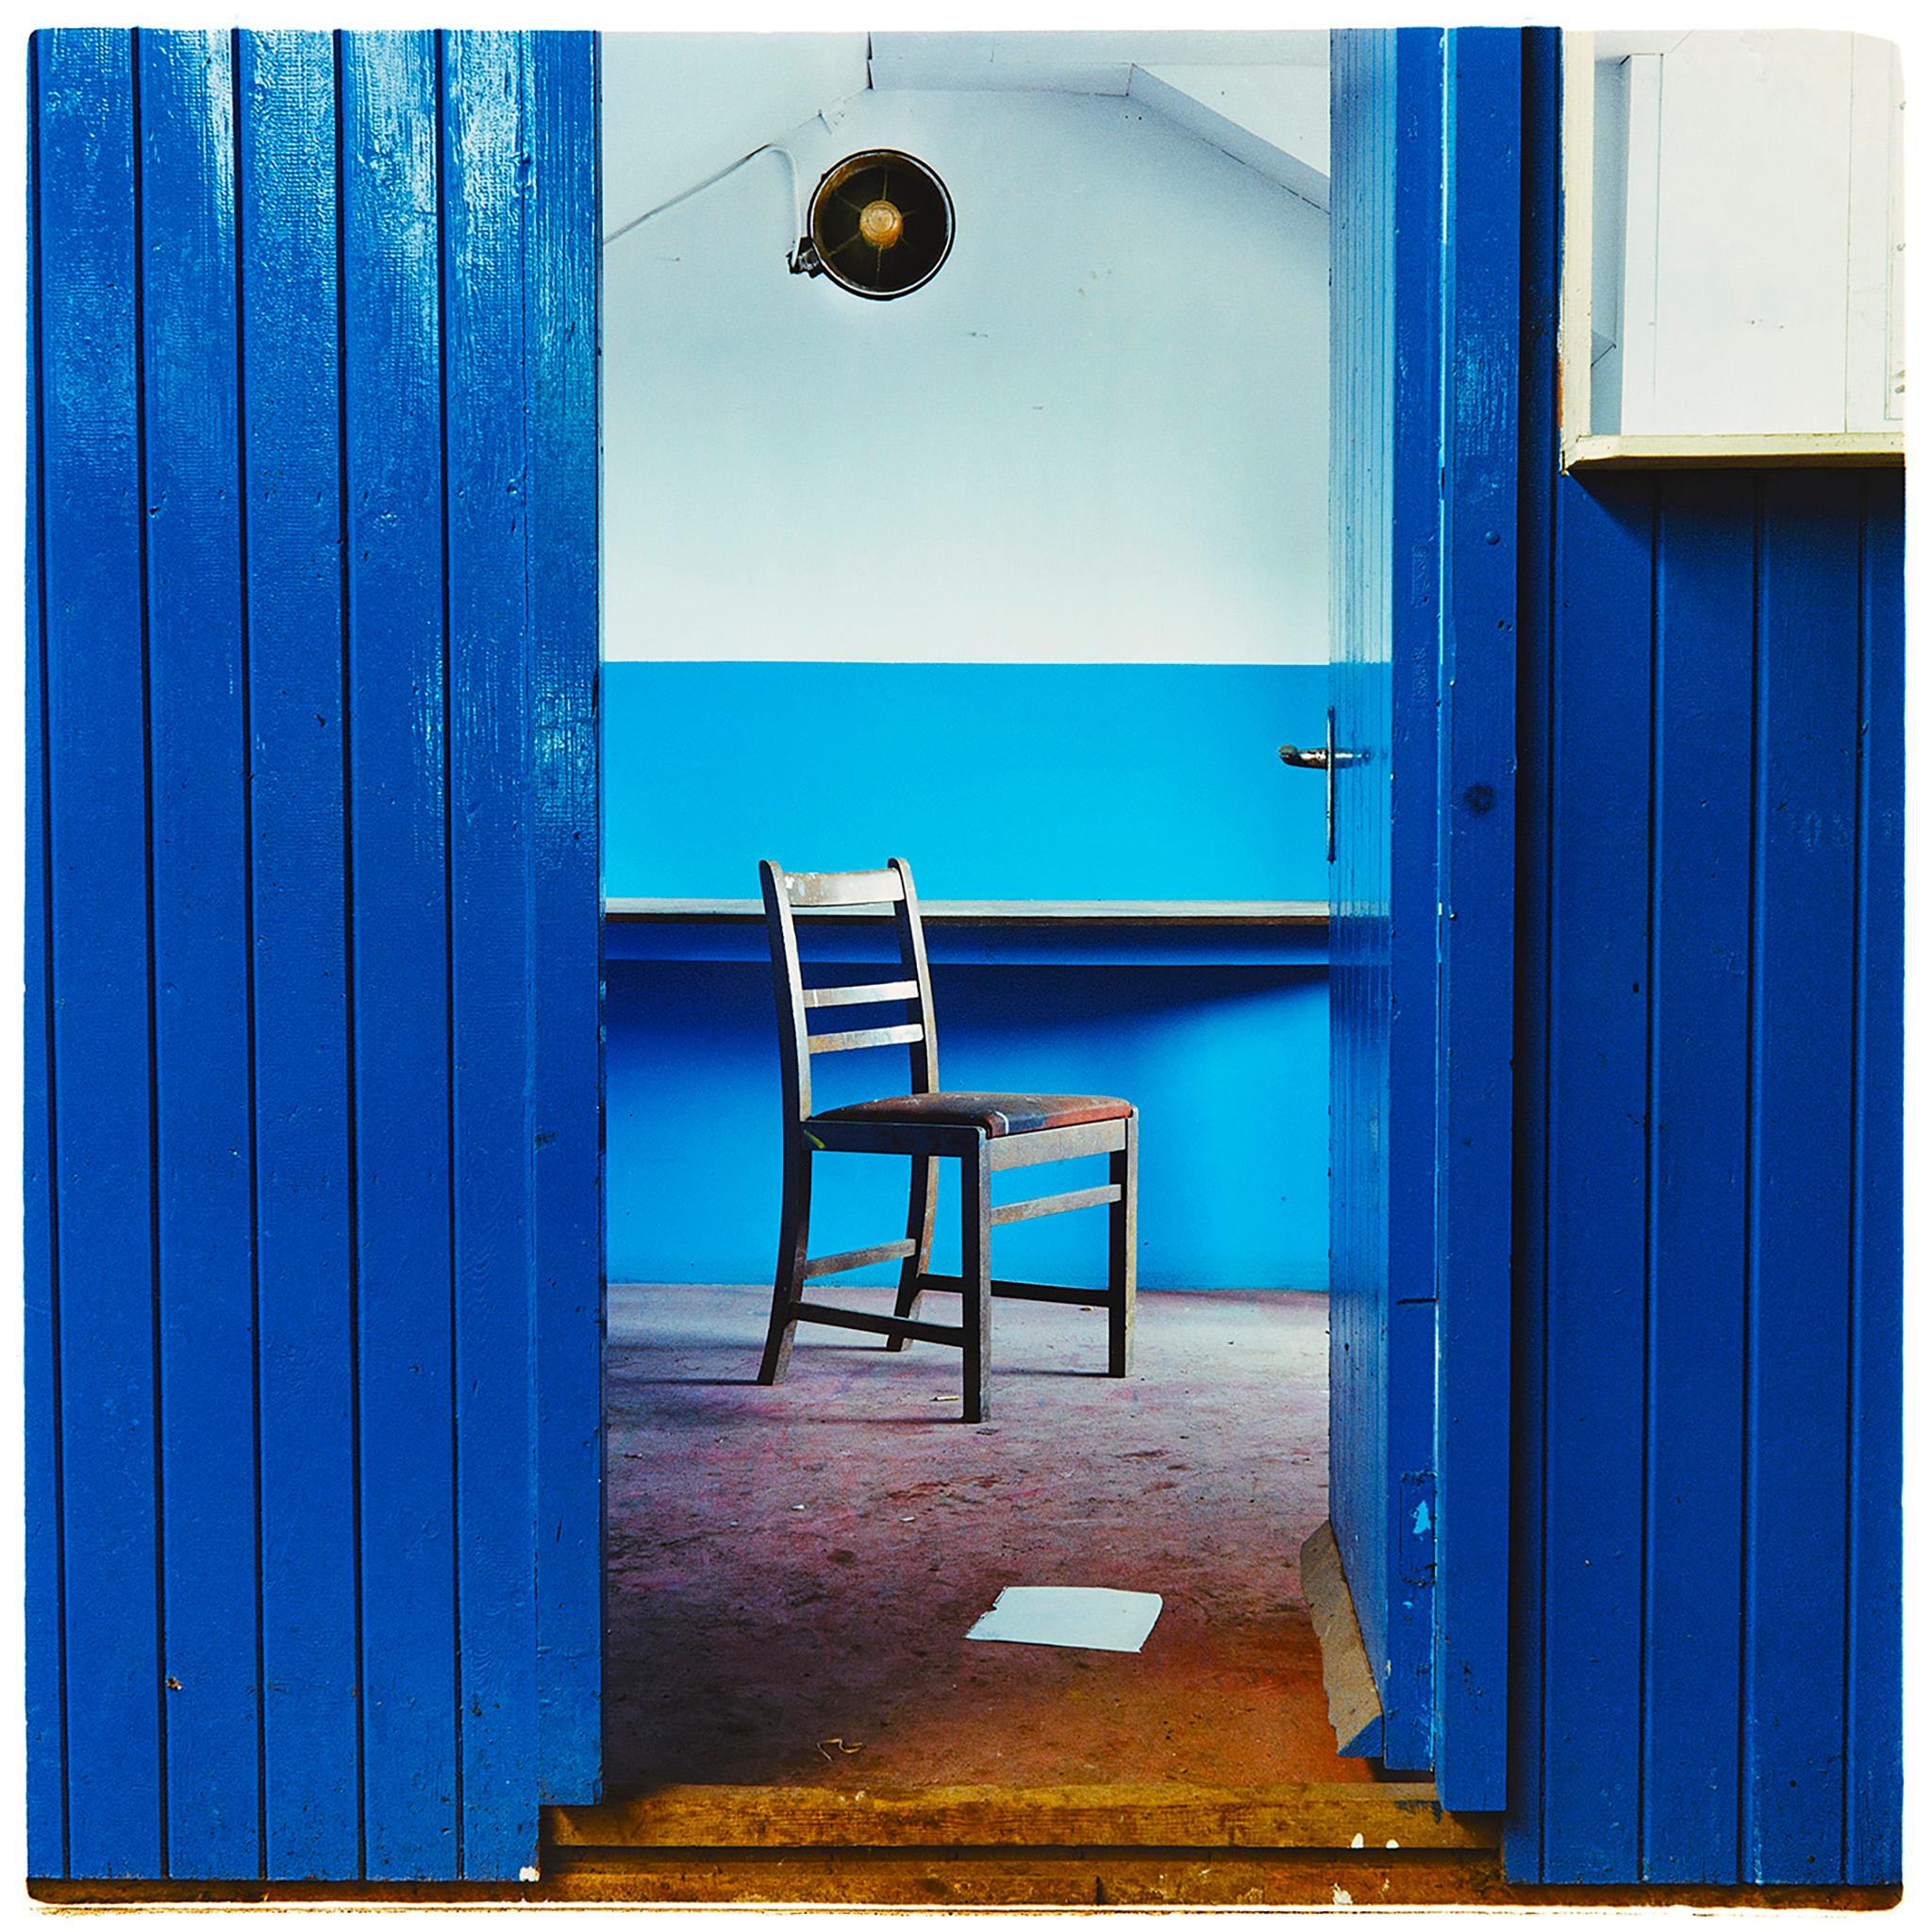 Ordinary Places Installation  - English vintage interior color photography For Sale 13